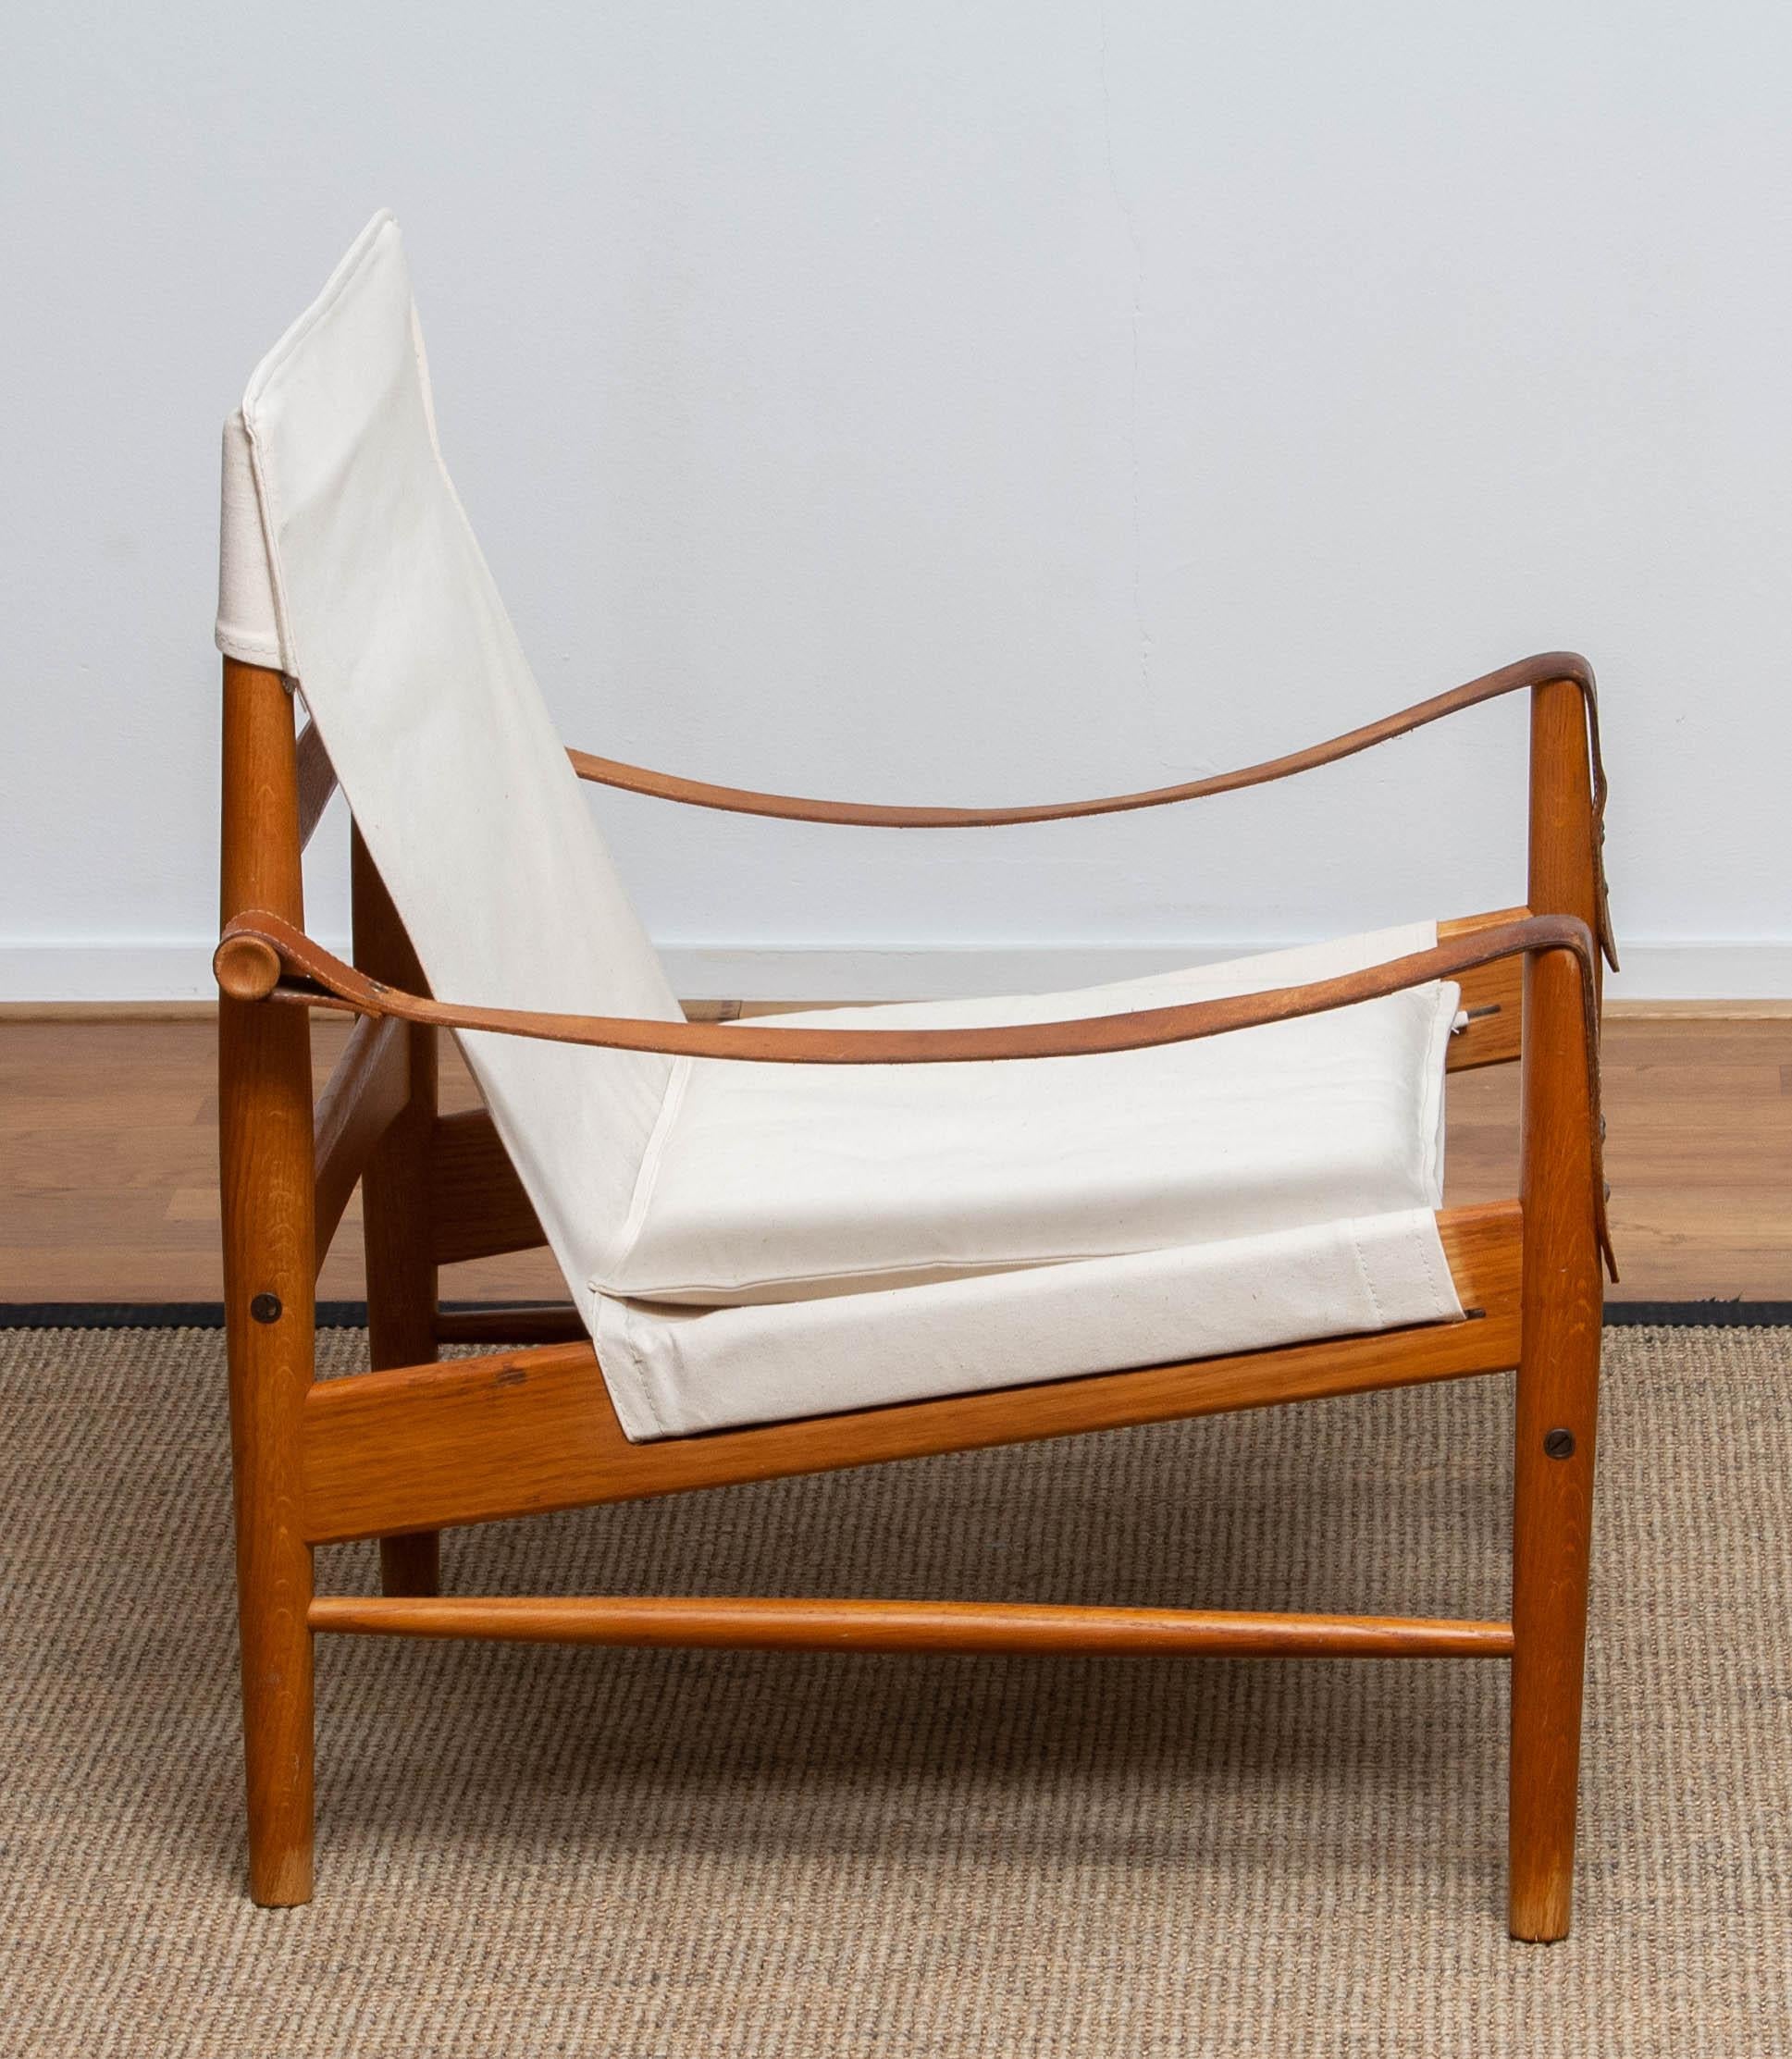 Beautiful safari chair designed by Hans Olsen for Viska Möbler in Kinna, Sweden.
This chairs are made of oak with a new canvas upholstery .
It is in a wonderful condition and marked.
Period 1960s.
Dimensions: H.81 cm, W.73 cm, D.70 cm, SH.38 cm.